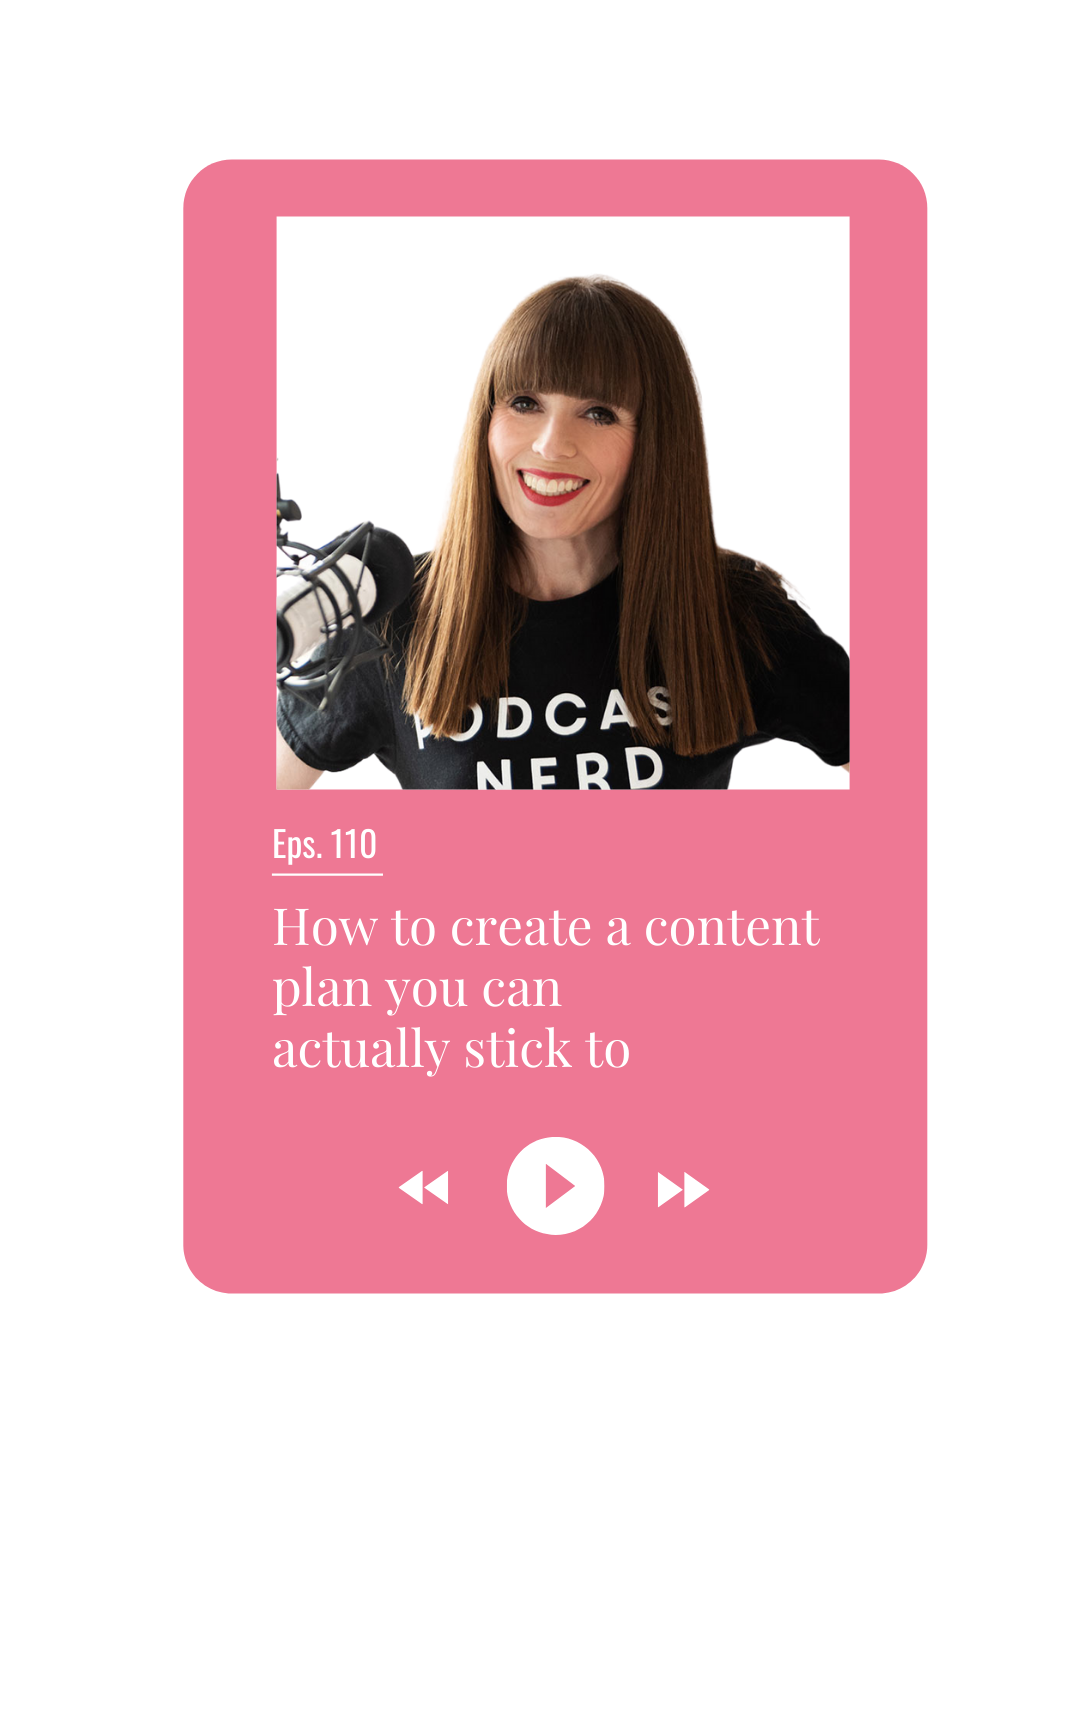 How to create a content plan you can actually stick to